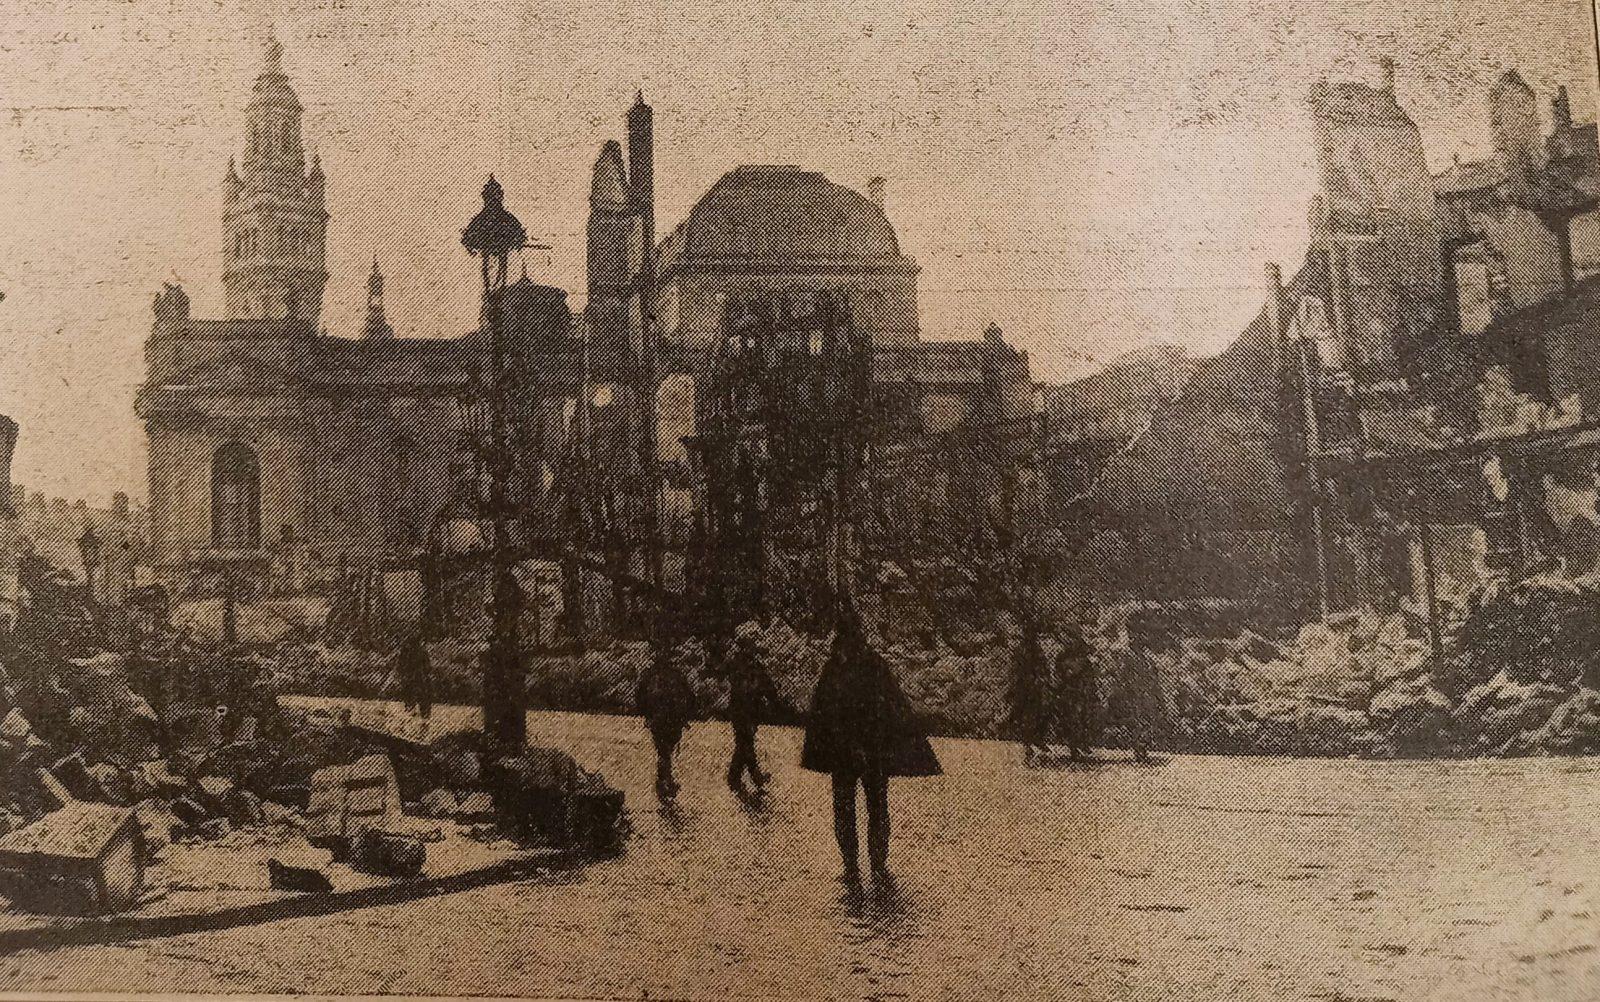 Photograph  showing Kippfugur seen in Lille, on 19th December 1914